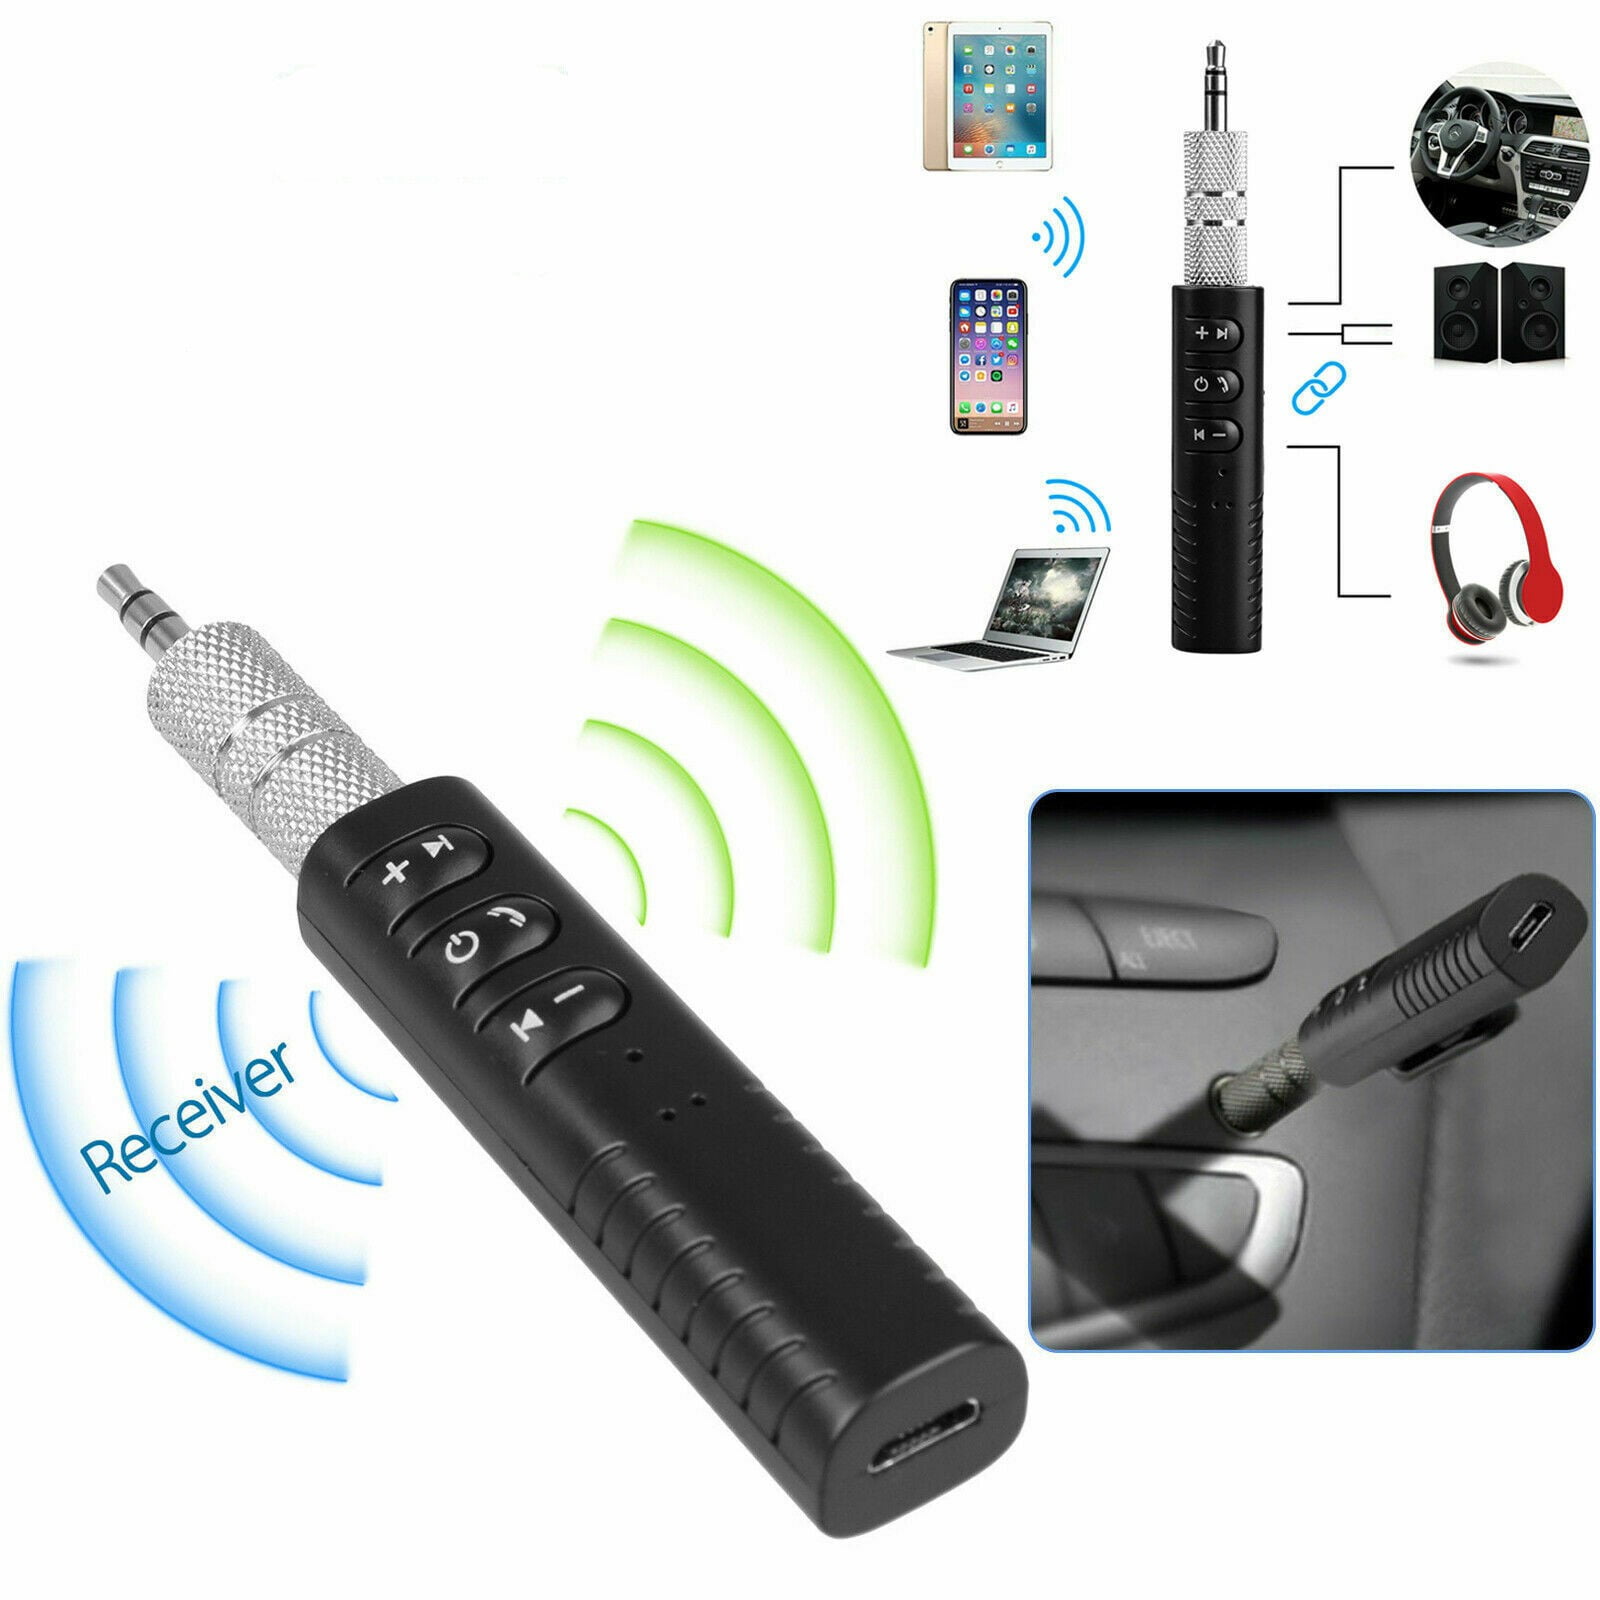 Bluetooth Audio Receiver Adapter For Car Aux Audio System Wireless Audio Jack 